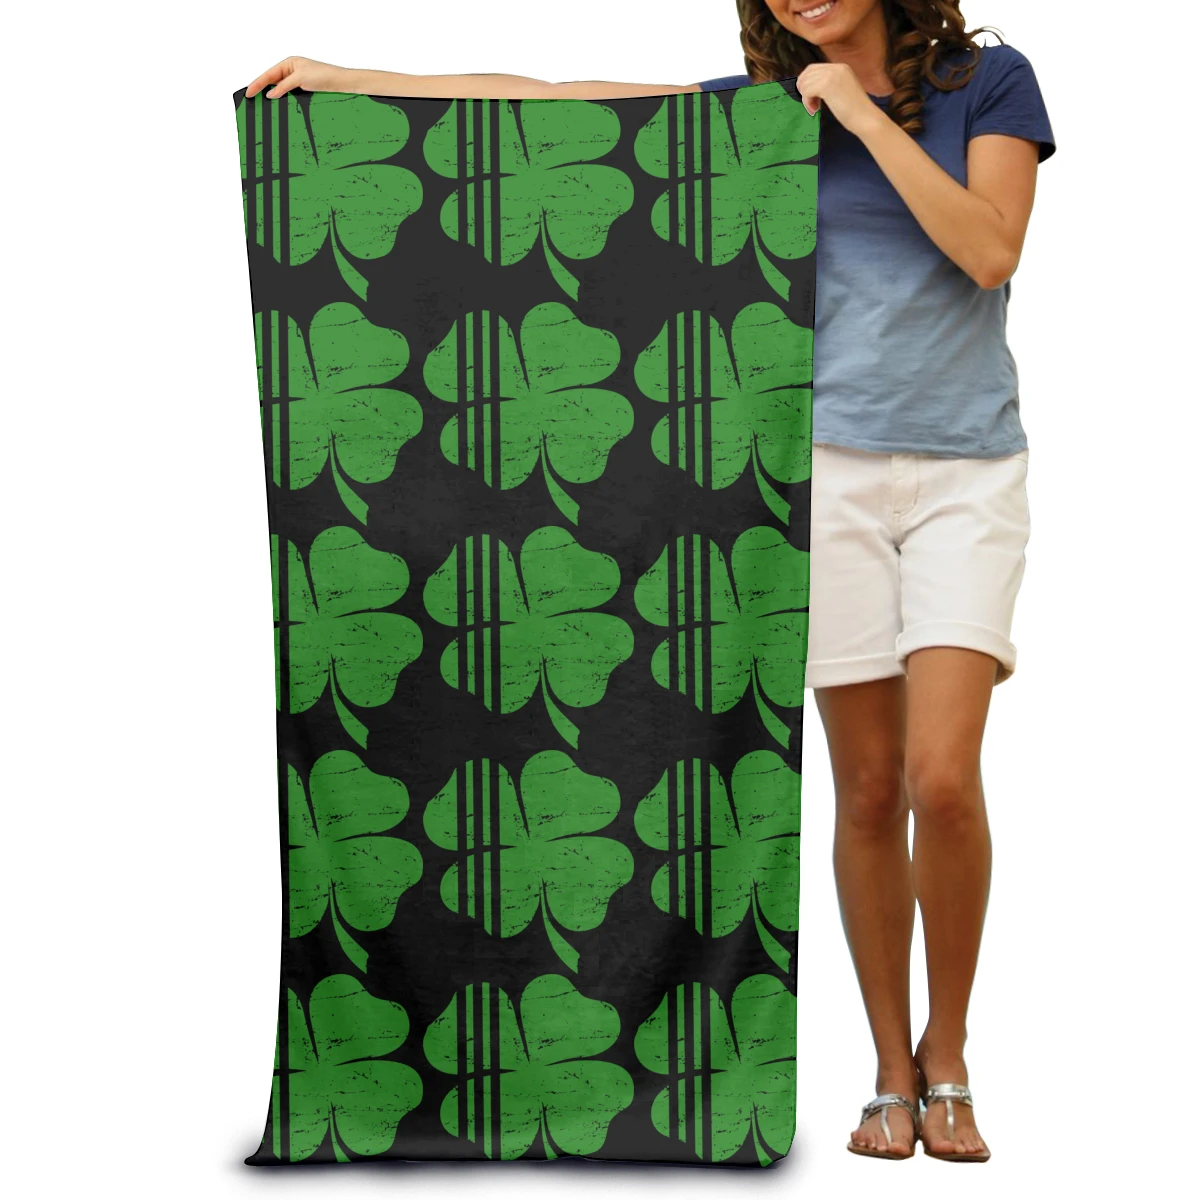 

Distressed Irish St Paddys Day Shamrock Microfiber Quick Dry Travel Beach Camping Gym Yoga Swimming Fabric Adult Towels Fitness